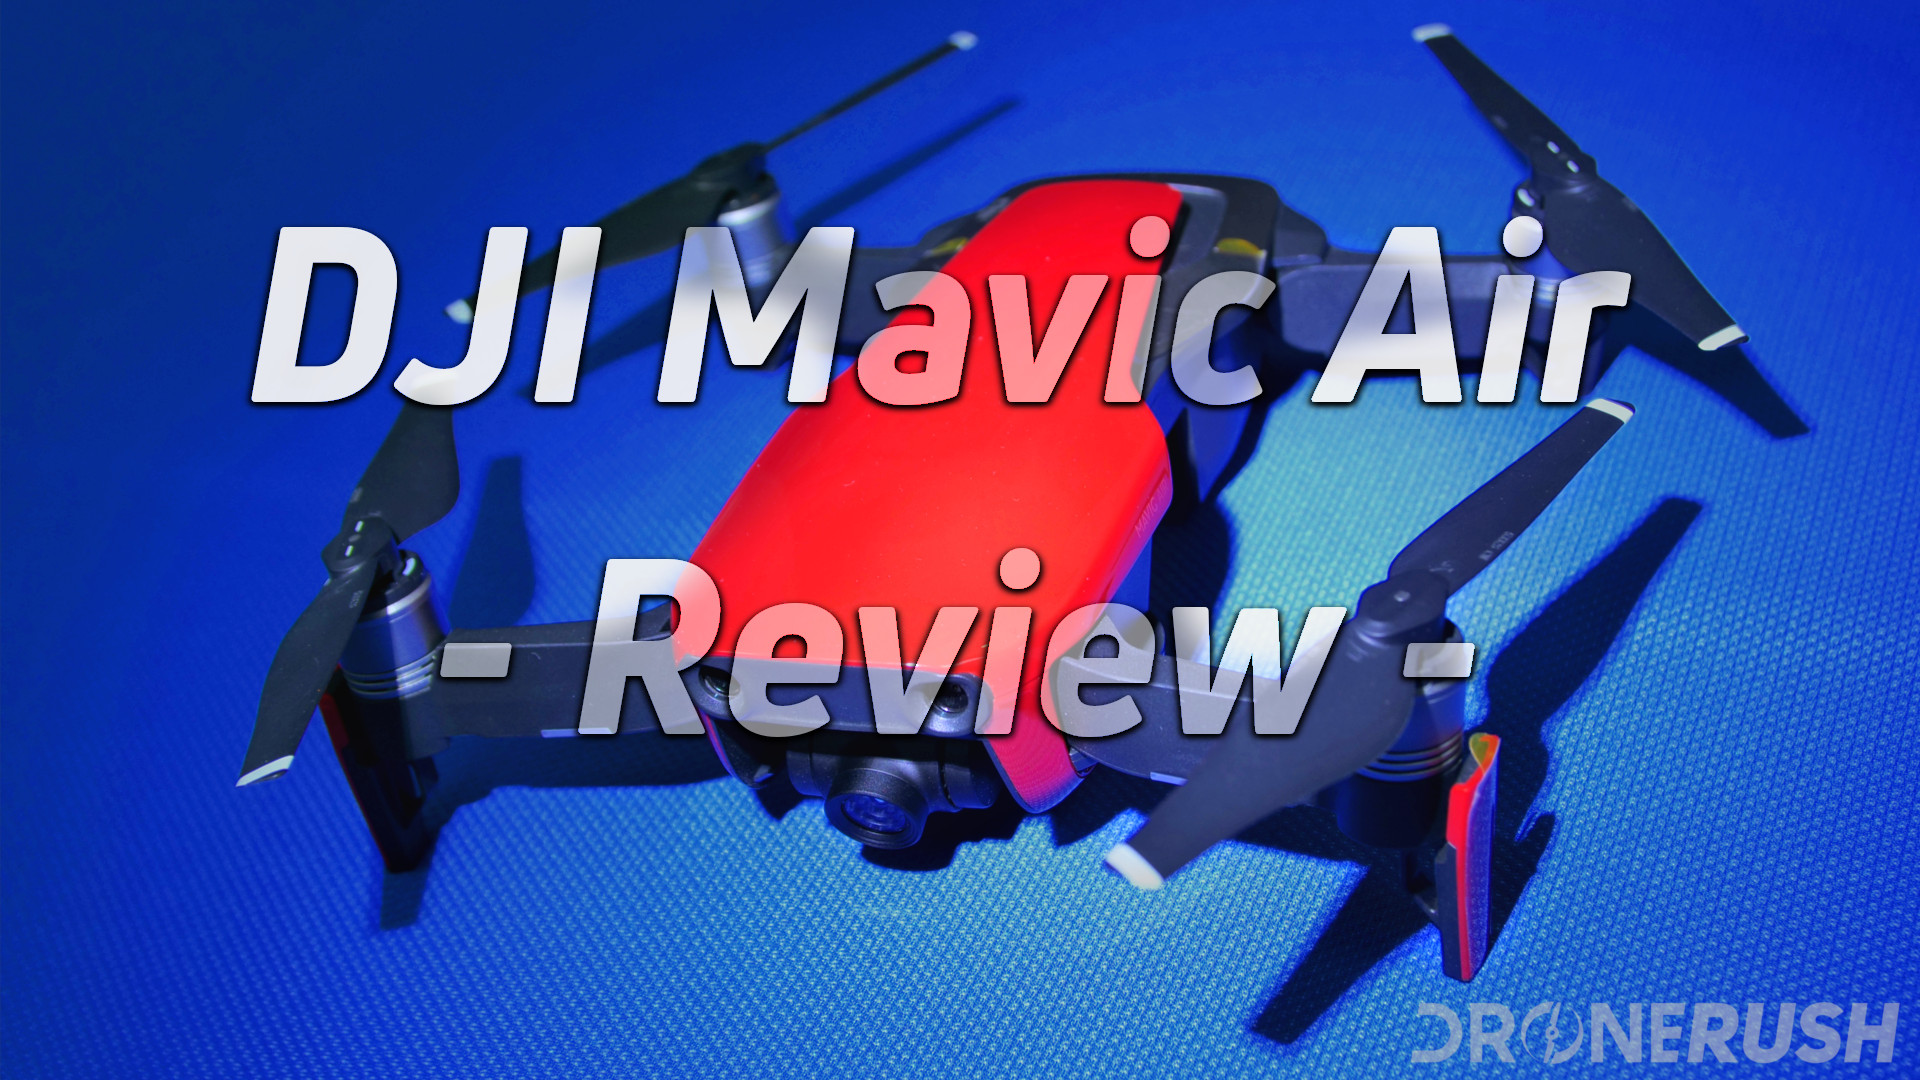 DJI Mavic Air review - small drone, big in the right ways - Drone Rush